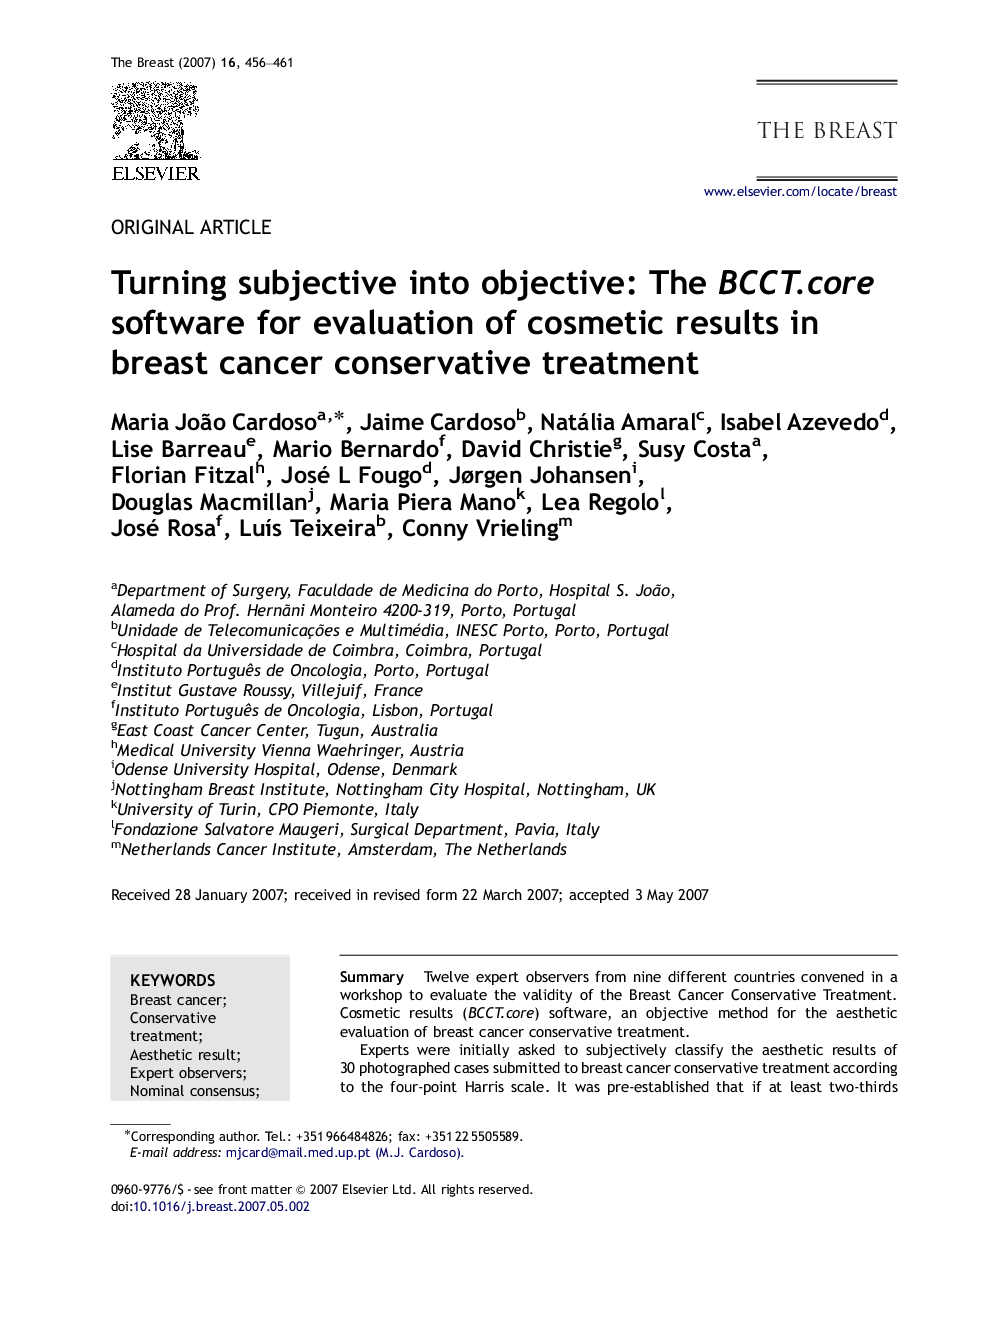 Turning subjective into objective: The BCCT.core software for evaluation of cosmetic results in breast cancer conservative treatment